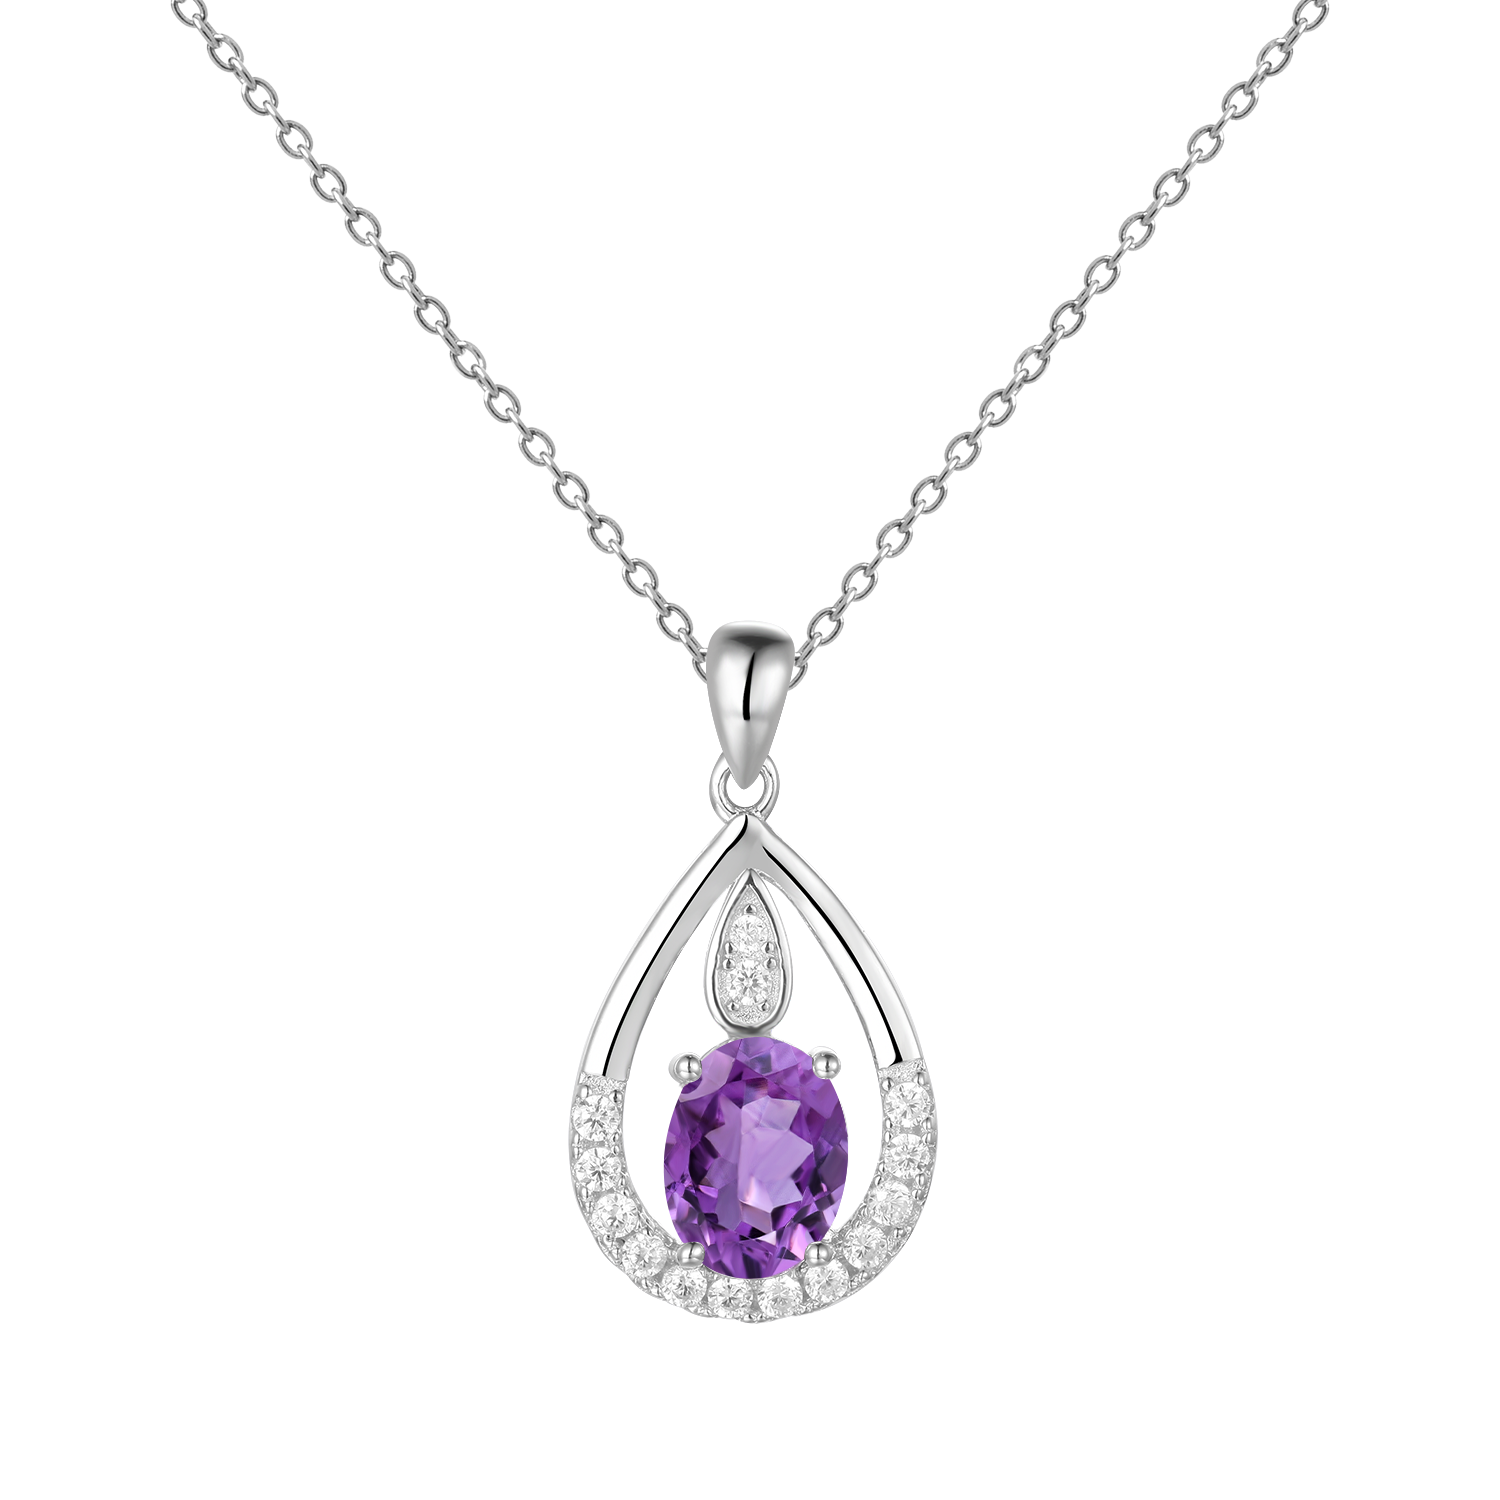 Gem&#39;s Ballet December Birthstone Topaz Necklace 6x8mm Oval Pink Topaz Pendant Necklace in 925 Sterling Silver with 18&quot; Chain Amethyst